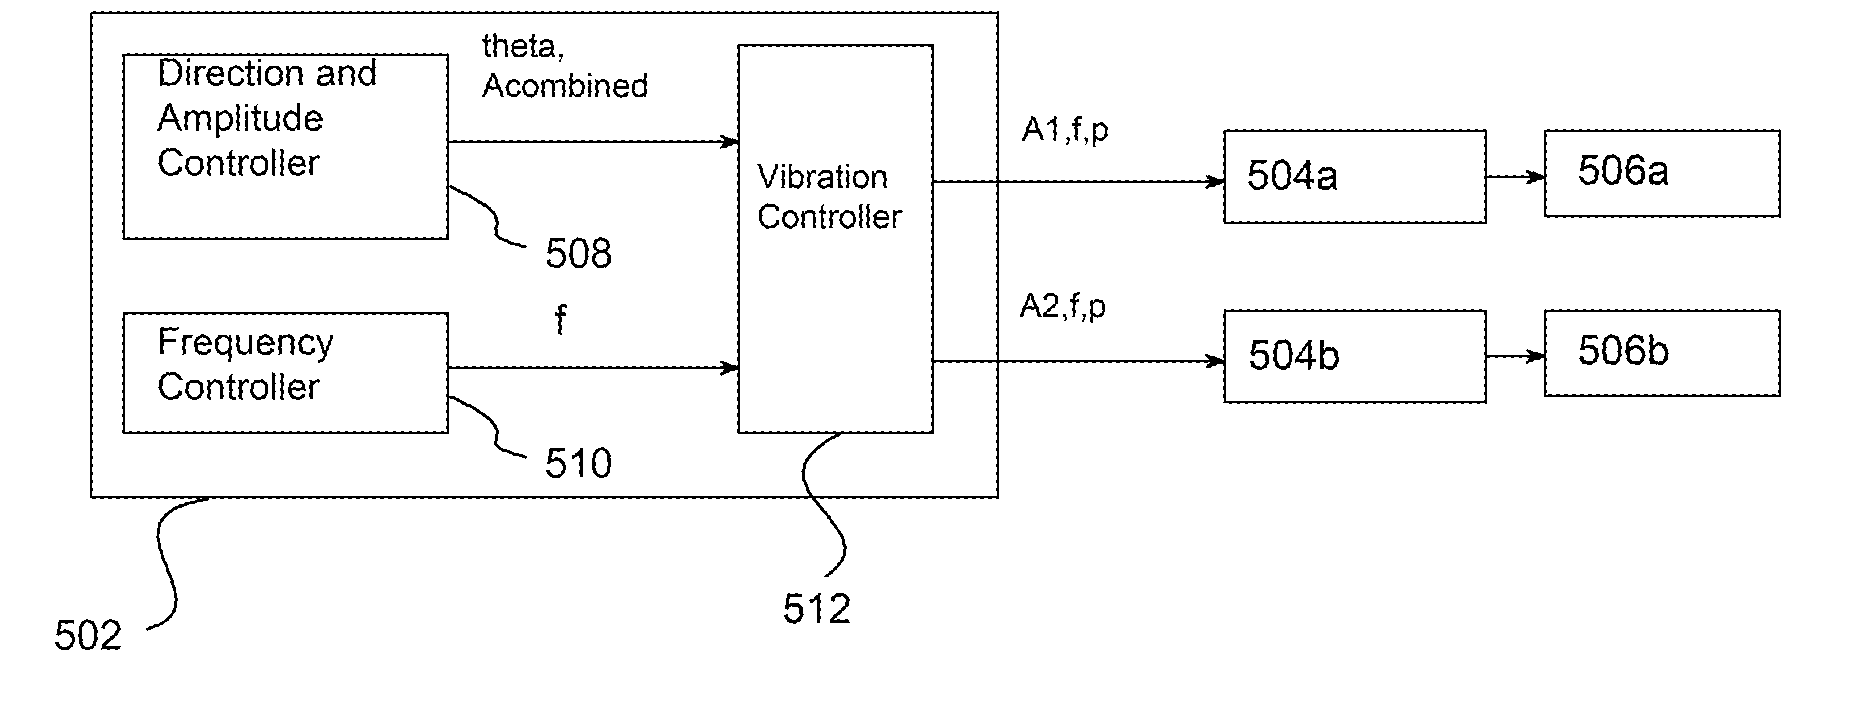 Asymmetric and general vibration waveforms from multiple synchronized vibration actuators